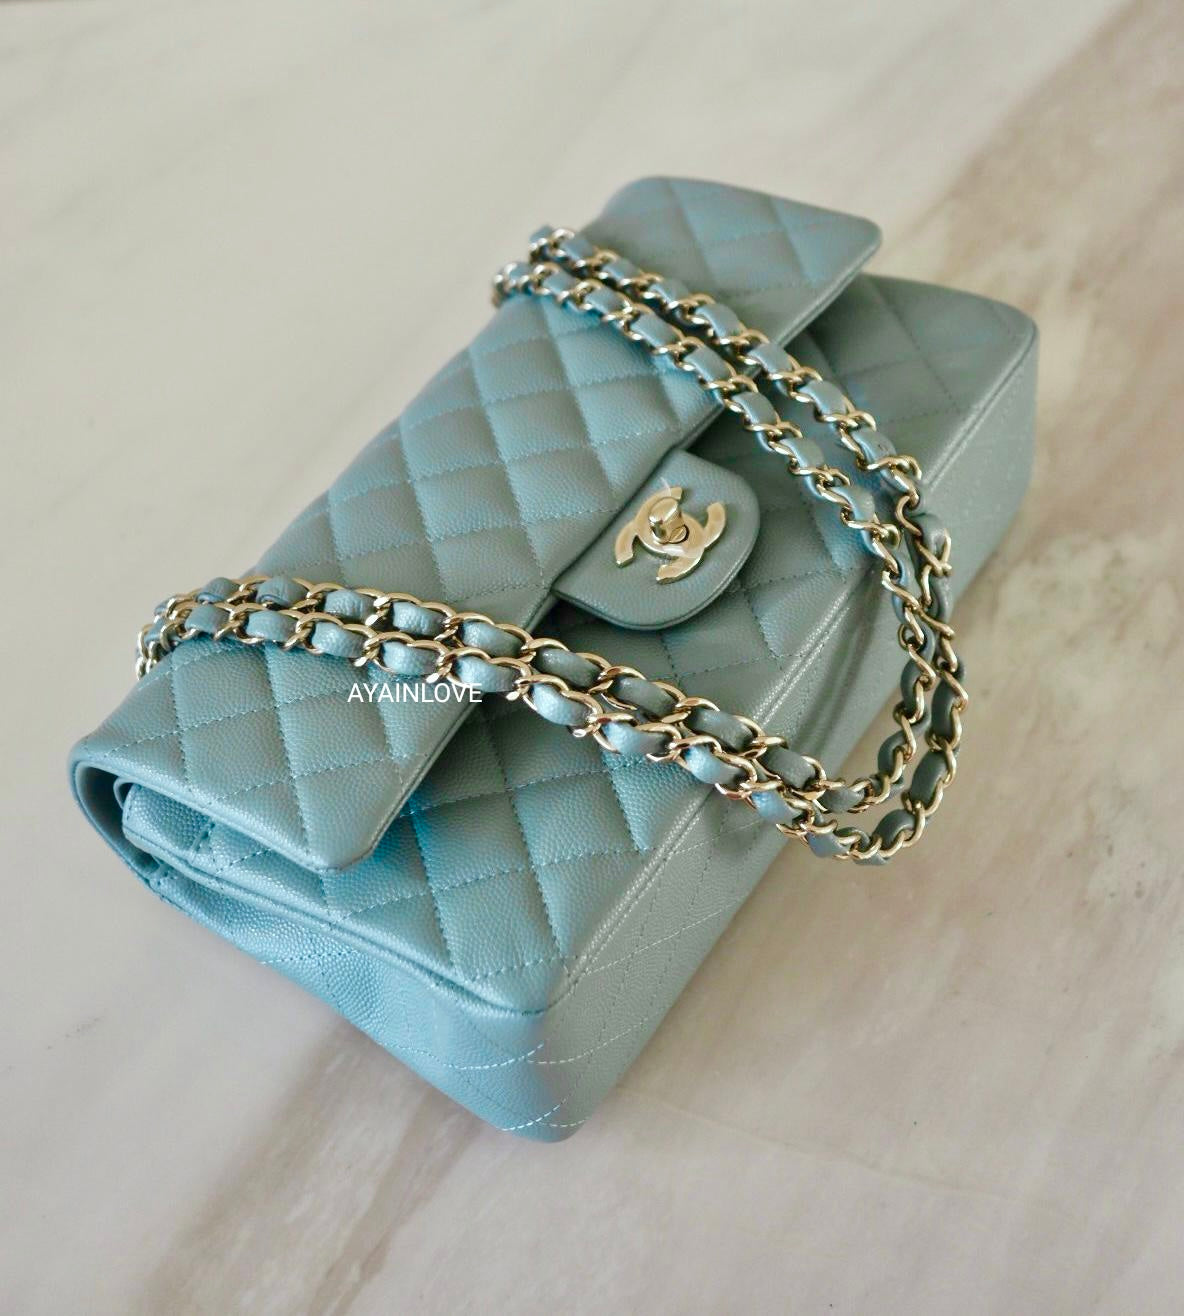 Timeless Chanel Blue Quilted Lambskin Medium Double Flap Bag Leather  ref.659514 - Joli Closet